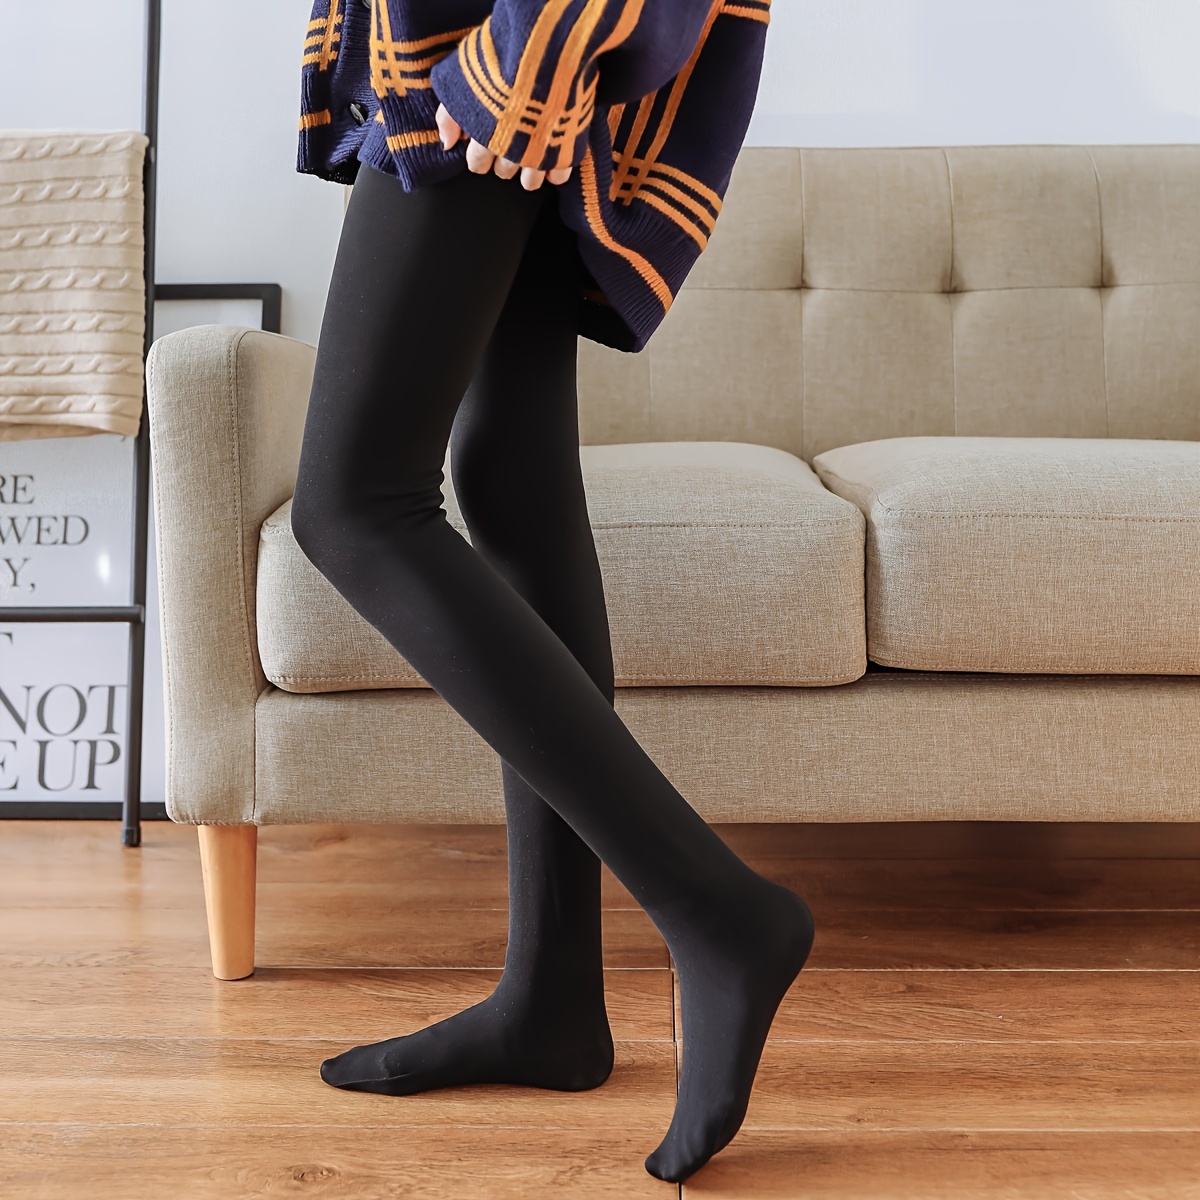 Plush Lined Tights, Opaque High Waist Thermal Elastic Leggings, Women's  Stockings & Hosiery